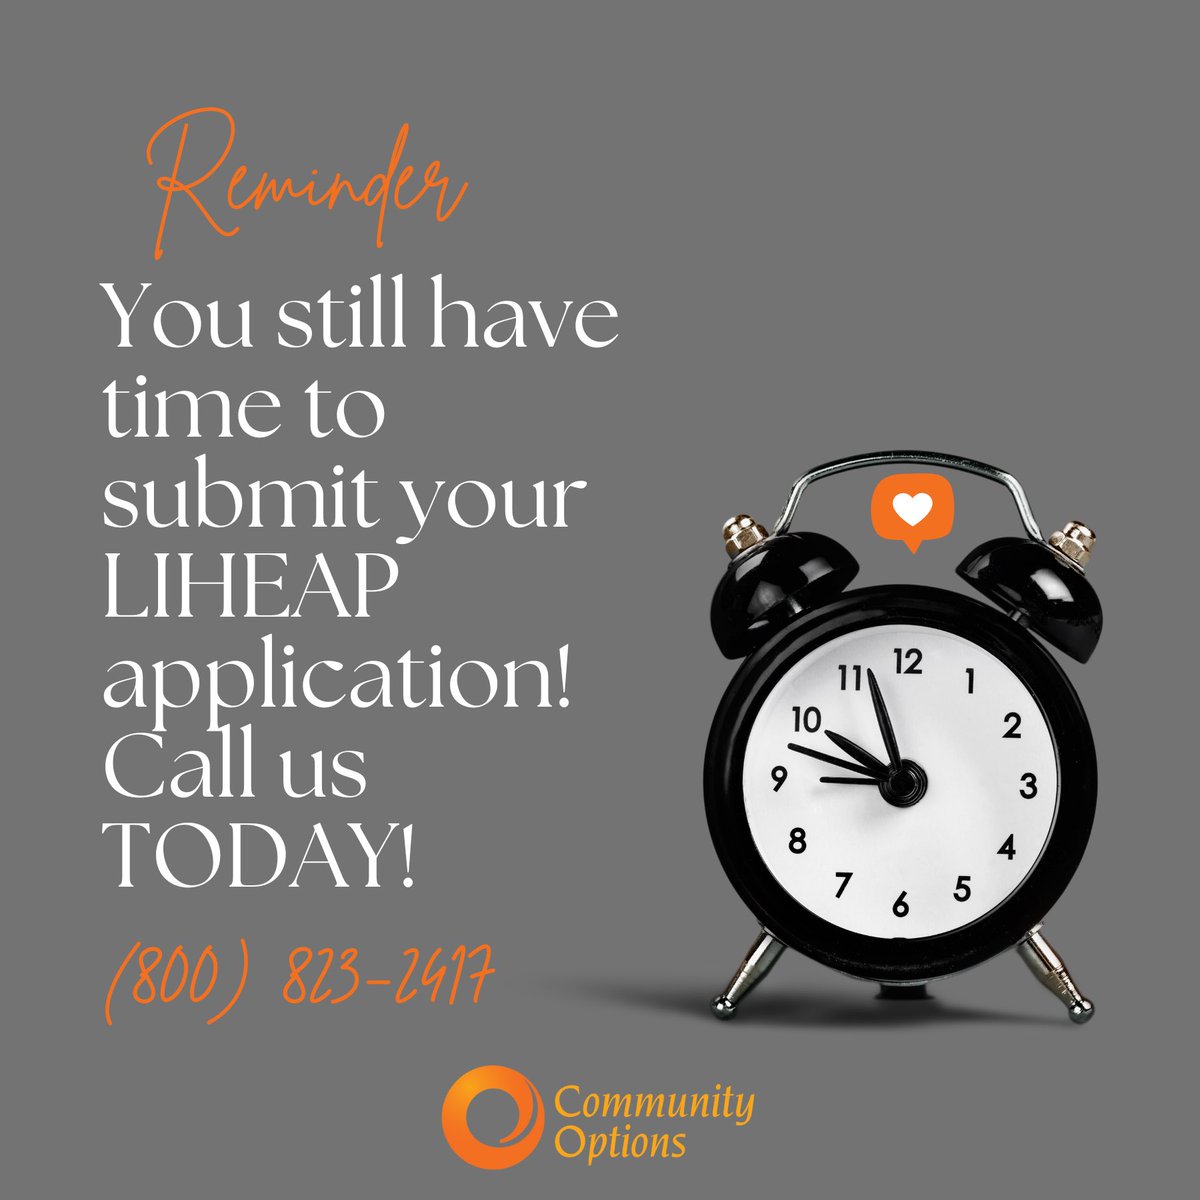 5.31.23 is the last day to submit your LIHEAP application! Call your local Community Options for application assistance. #LIHEAP #EnergyAssistance #ComOptND